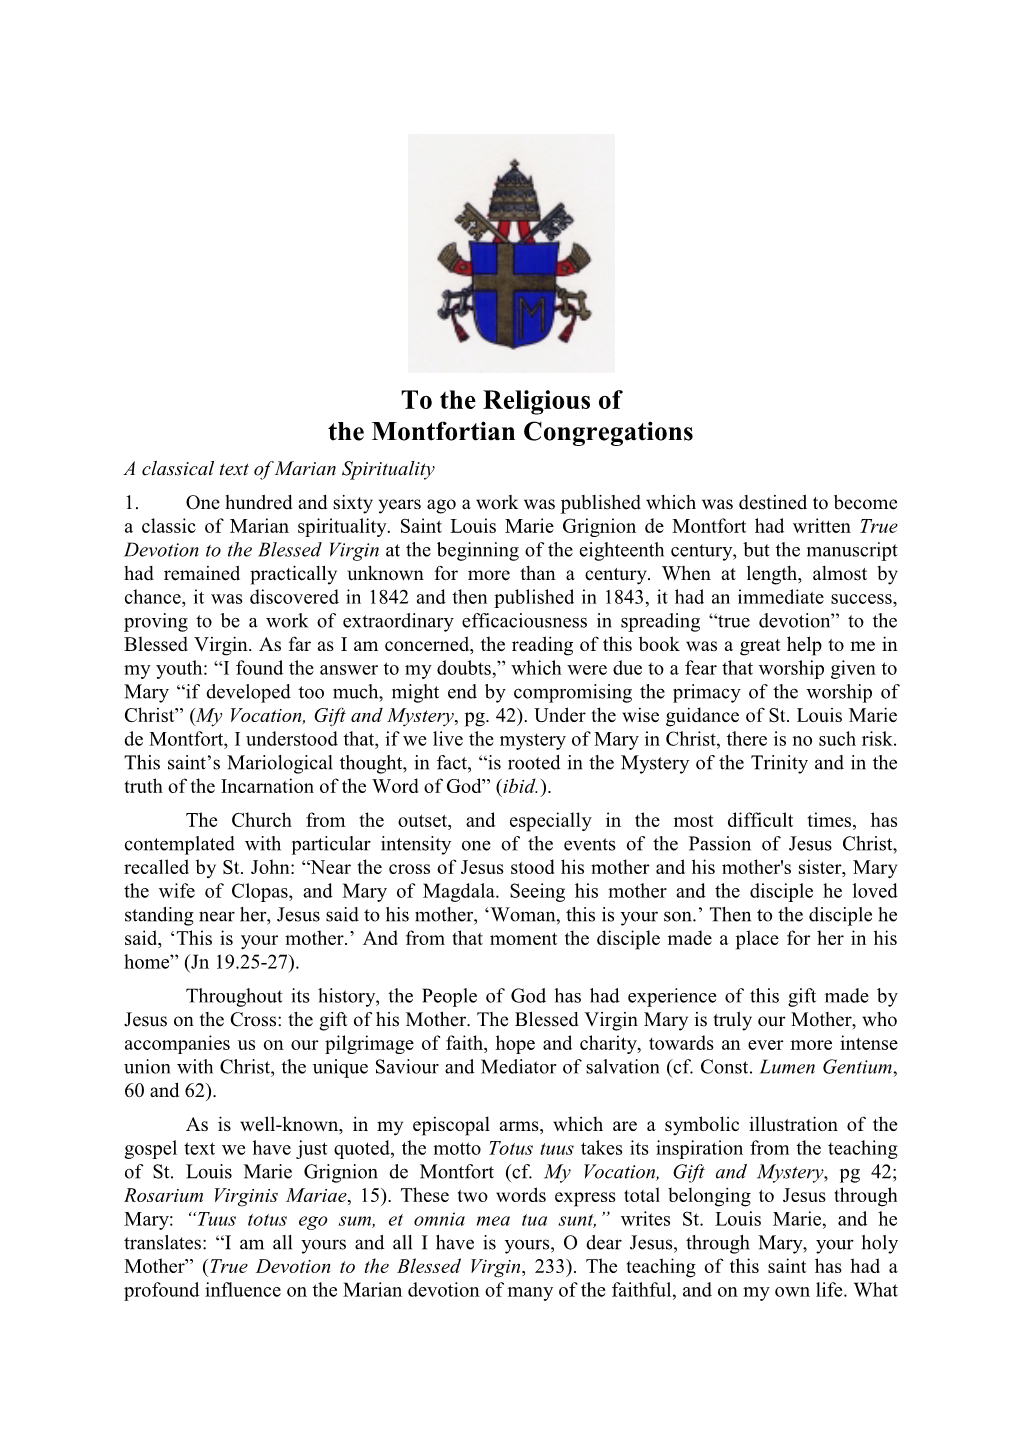 To the Religious of the Montfortian Congregations a Classical Text of Marian Spirituality 1